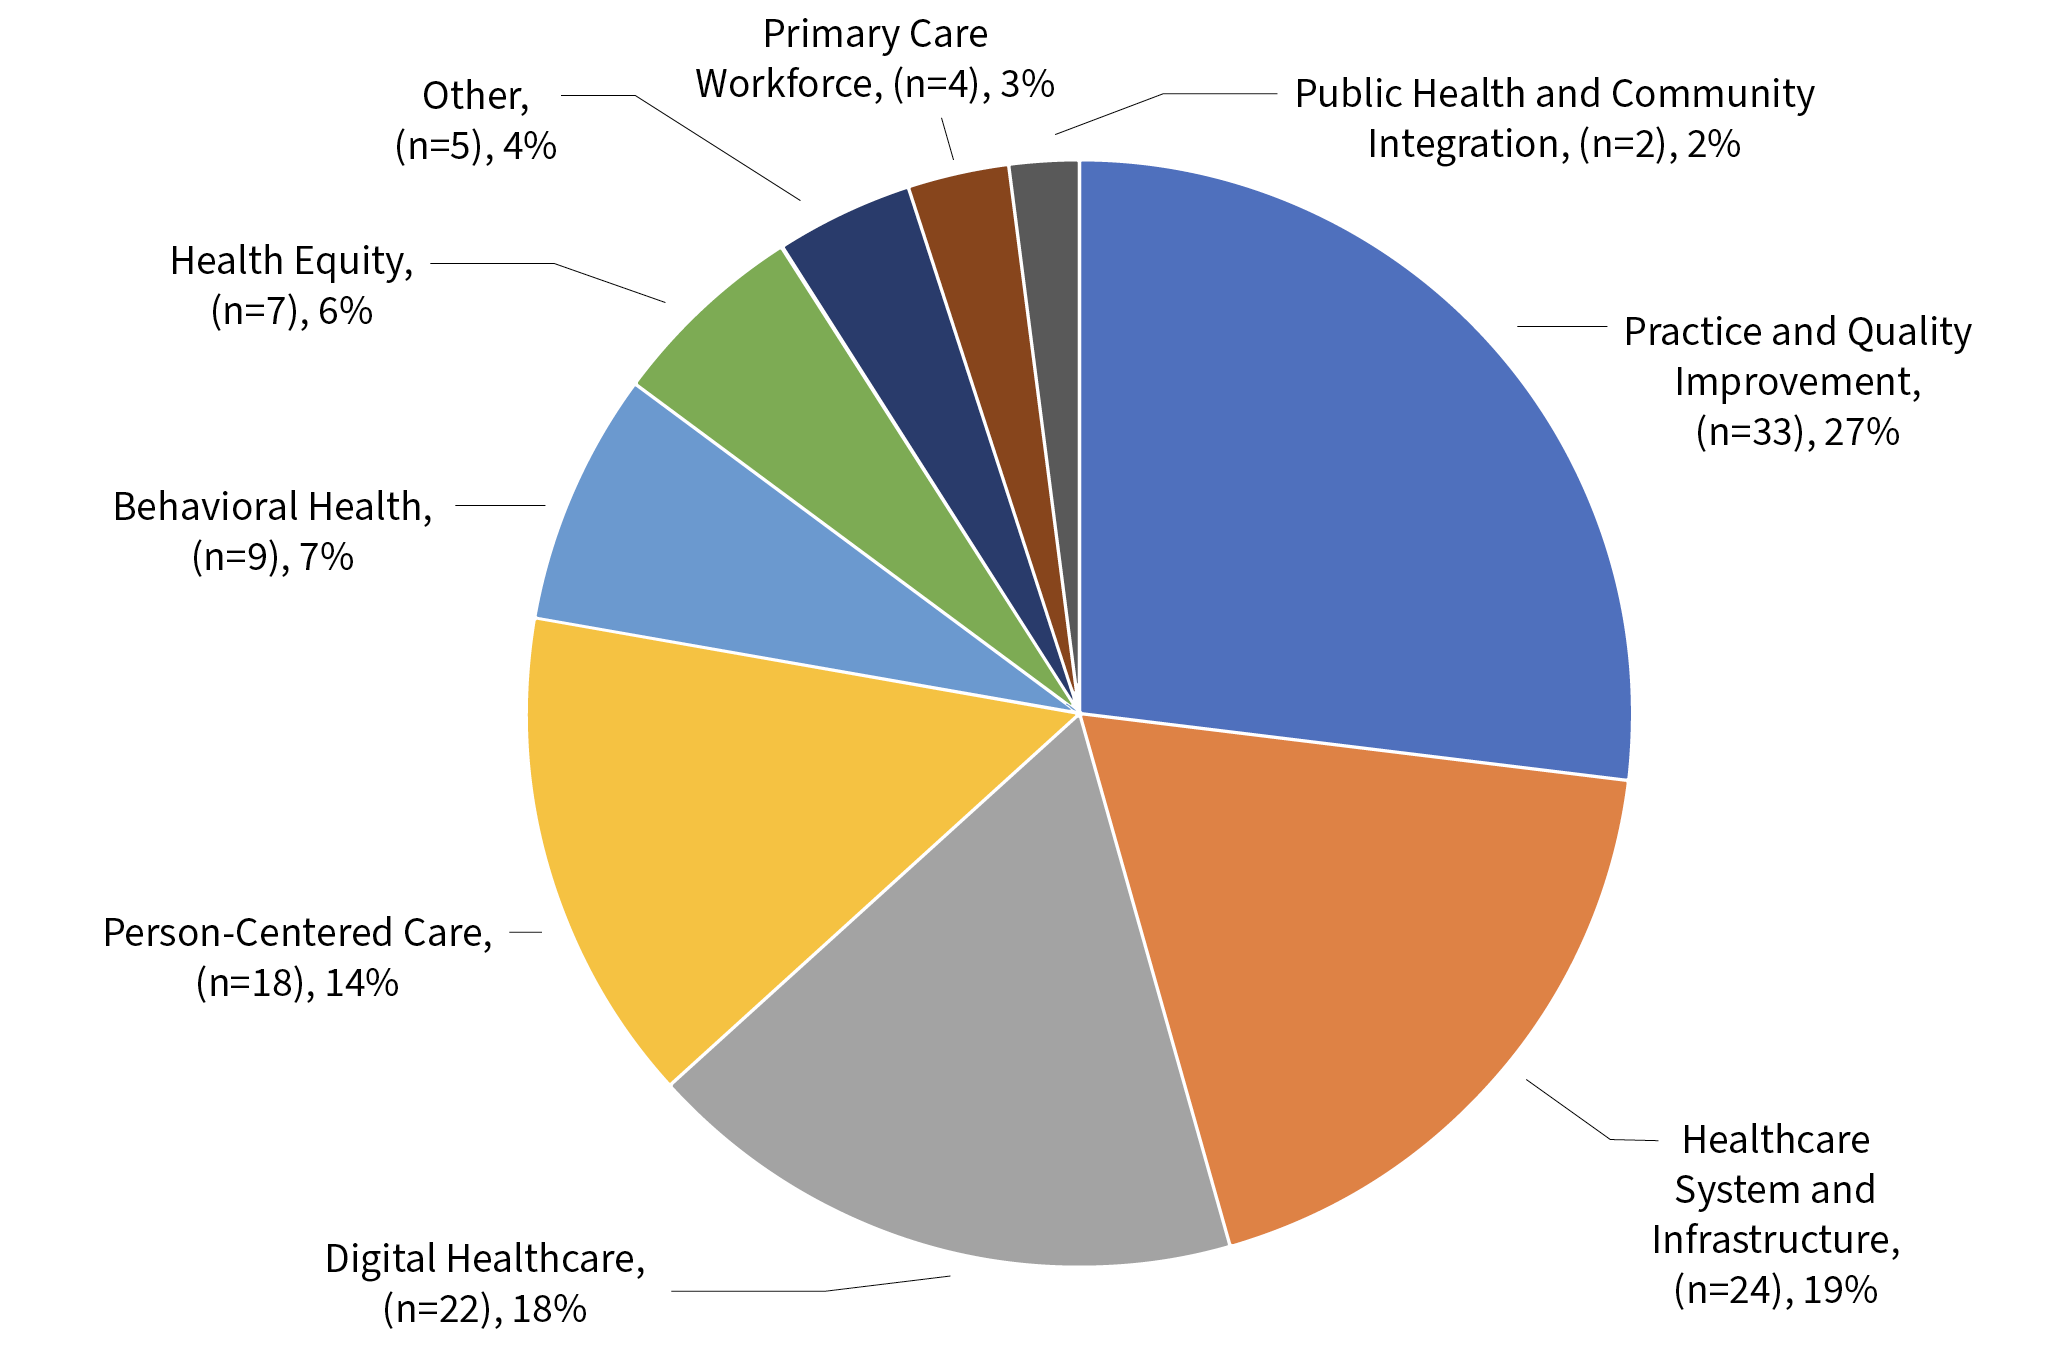 This pie chart shows the proportion of grants by topic area when looking at the one topic area that best describes each grant. This includes 27% (n=33) for Practice and Quality Improvement; 19% (n=24) for Healthcare System and Infrastructure; 18% (n=22) for Digital Healthcare; 14% (N=18) for Person-Centered Care; 7% (n=9) for Behavioral Health; 6% (n=7) for Health Equity; 4% (n=5) for Other; 3% (n=4) for Primary Care Workforce; and 2% (n=2) for Public Health and Community Integration.